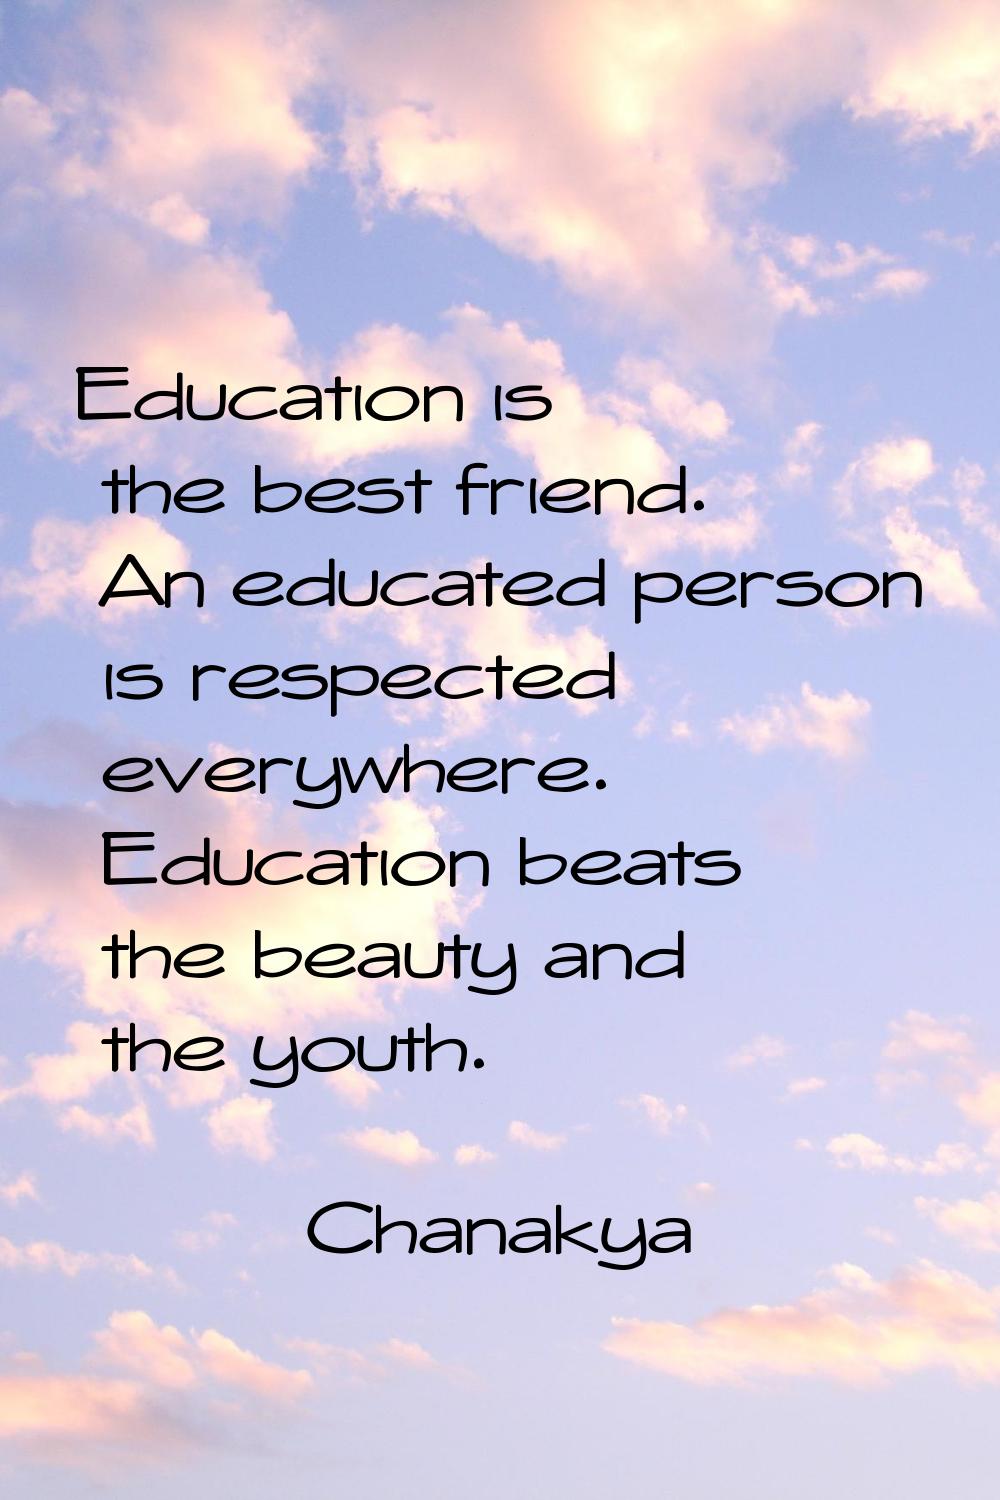 Education is the best friend. An educated person is respected everywhere. Education beats the beaut